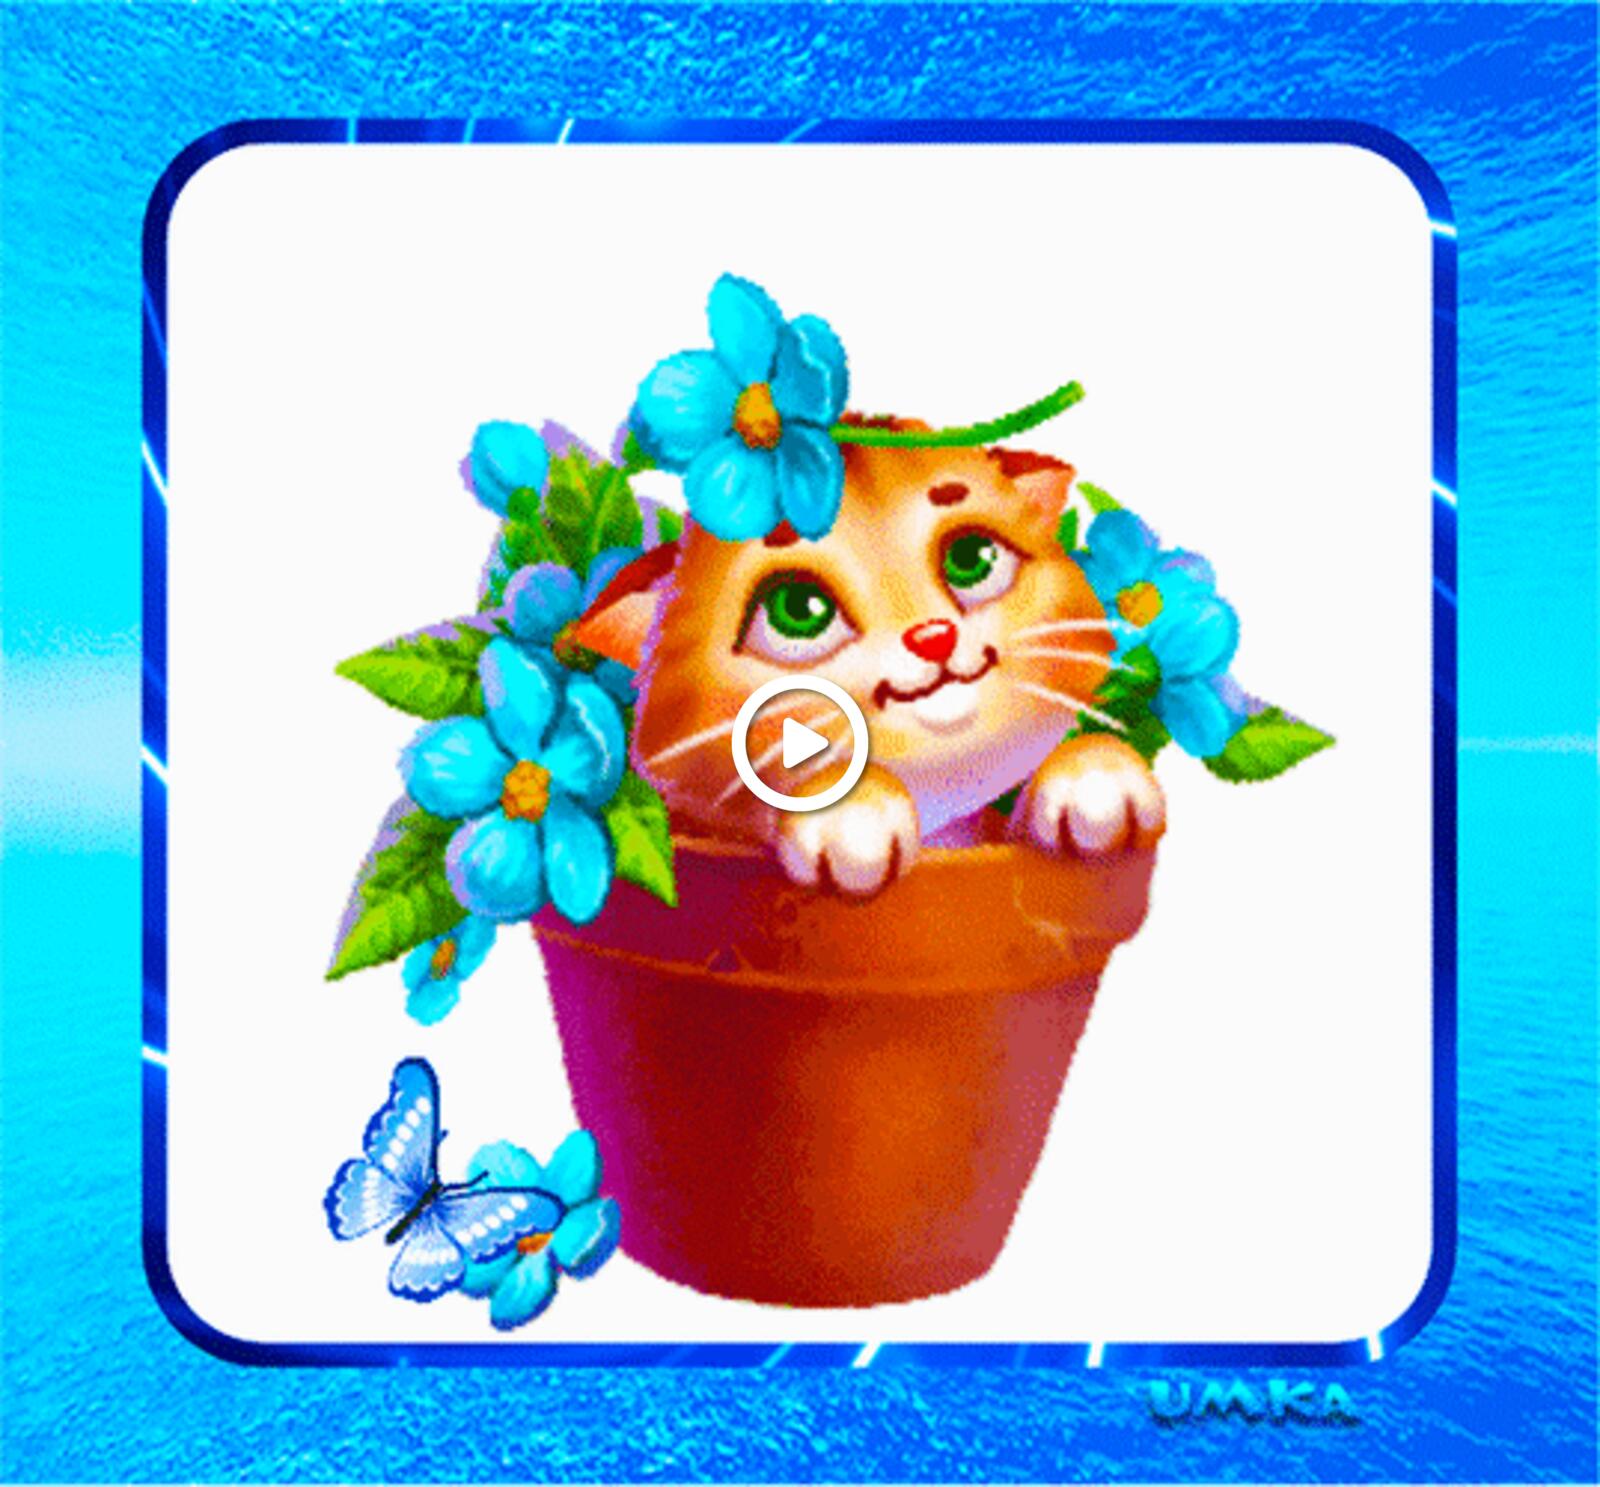 A postcard on the subject of joy kitten flowers for free